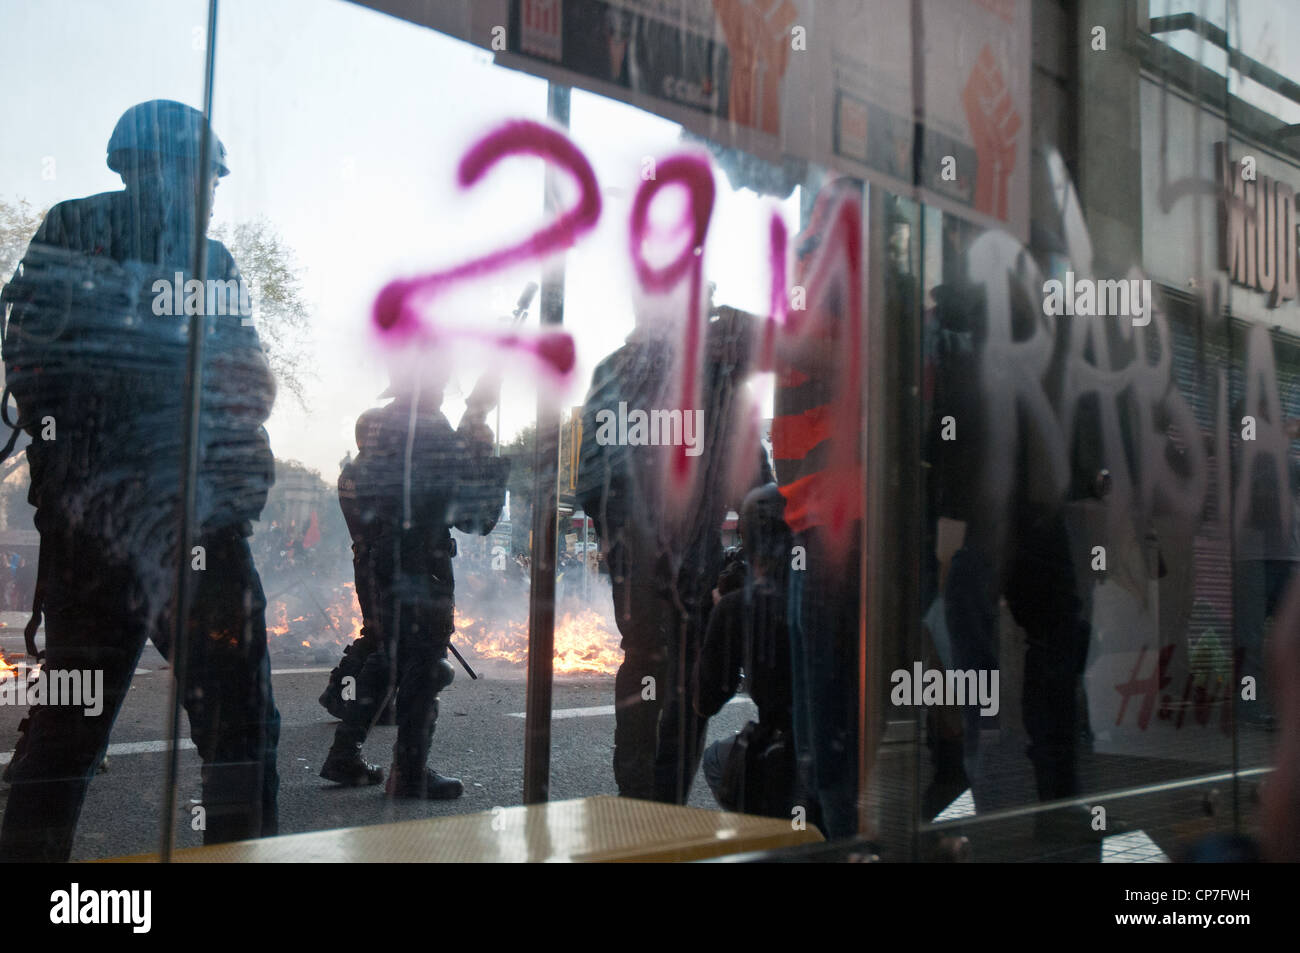 Police, reporters and fire are seen through the spray painted glass of a Barcelona bus stop during the general strike. Stock Photo